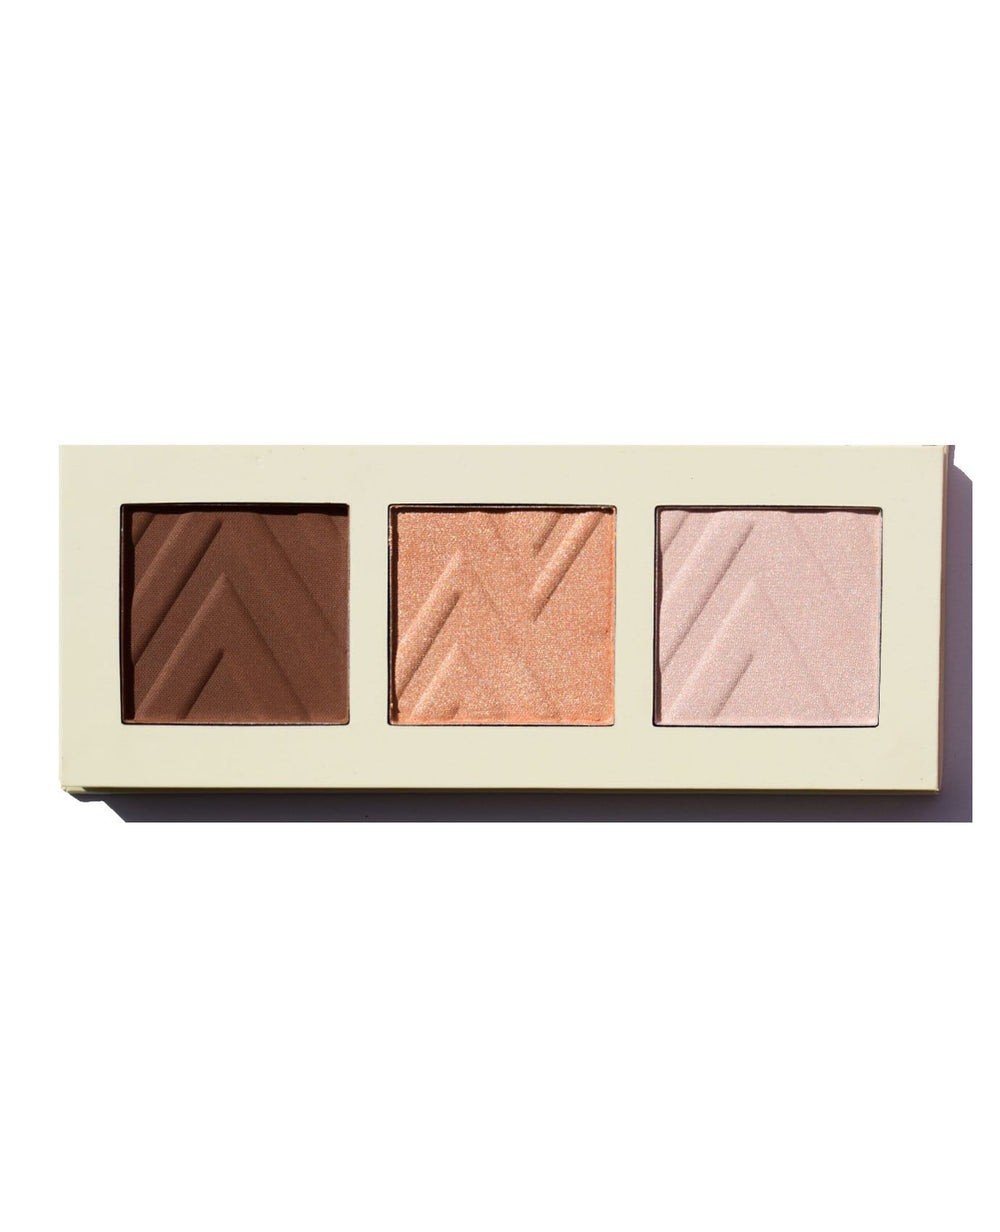 S.he Hey Cheeks Face Palette